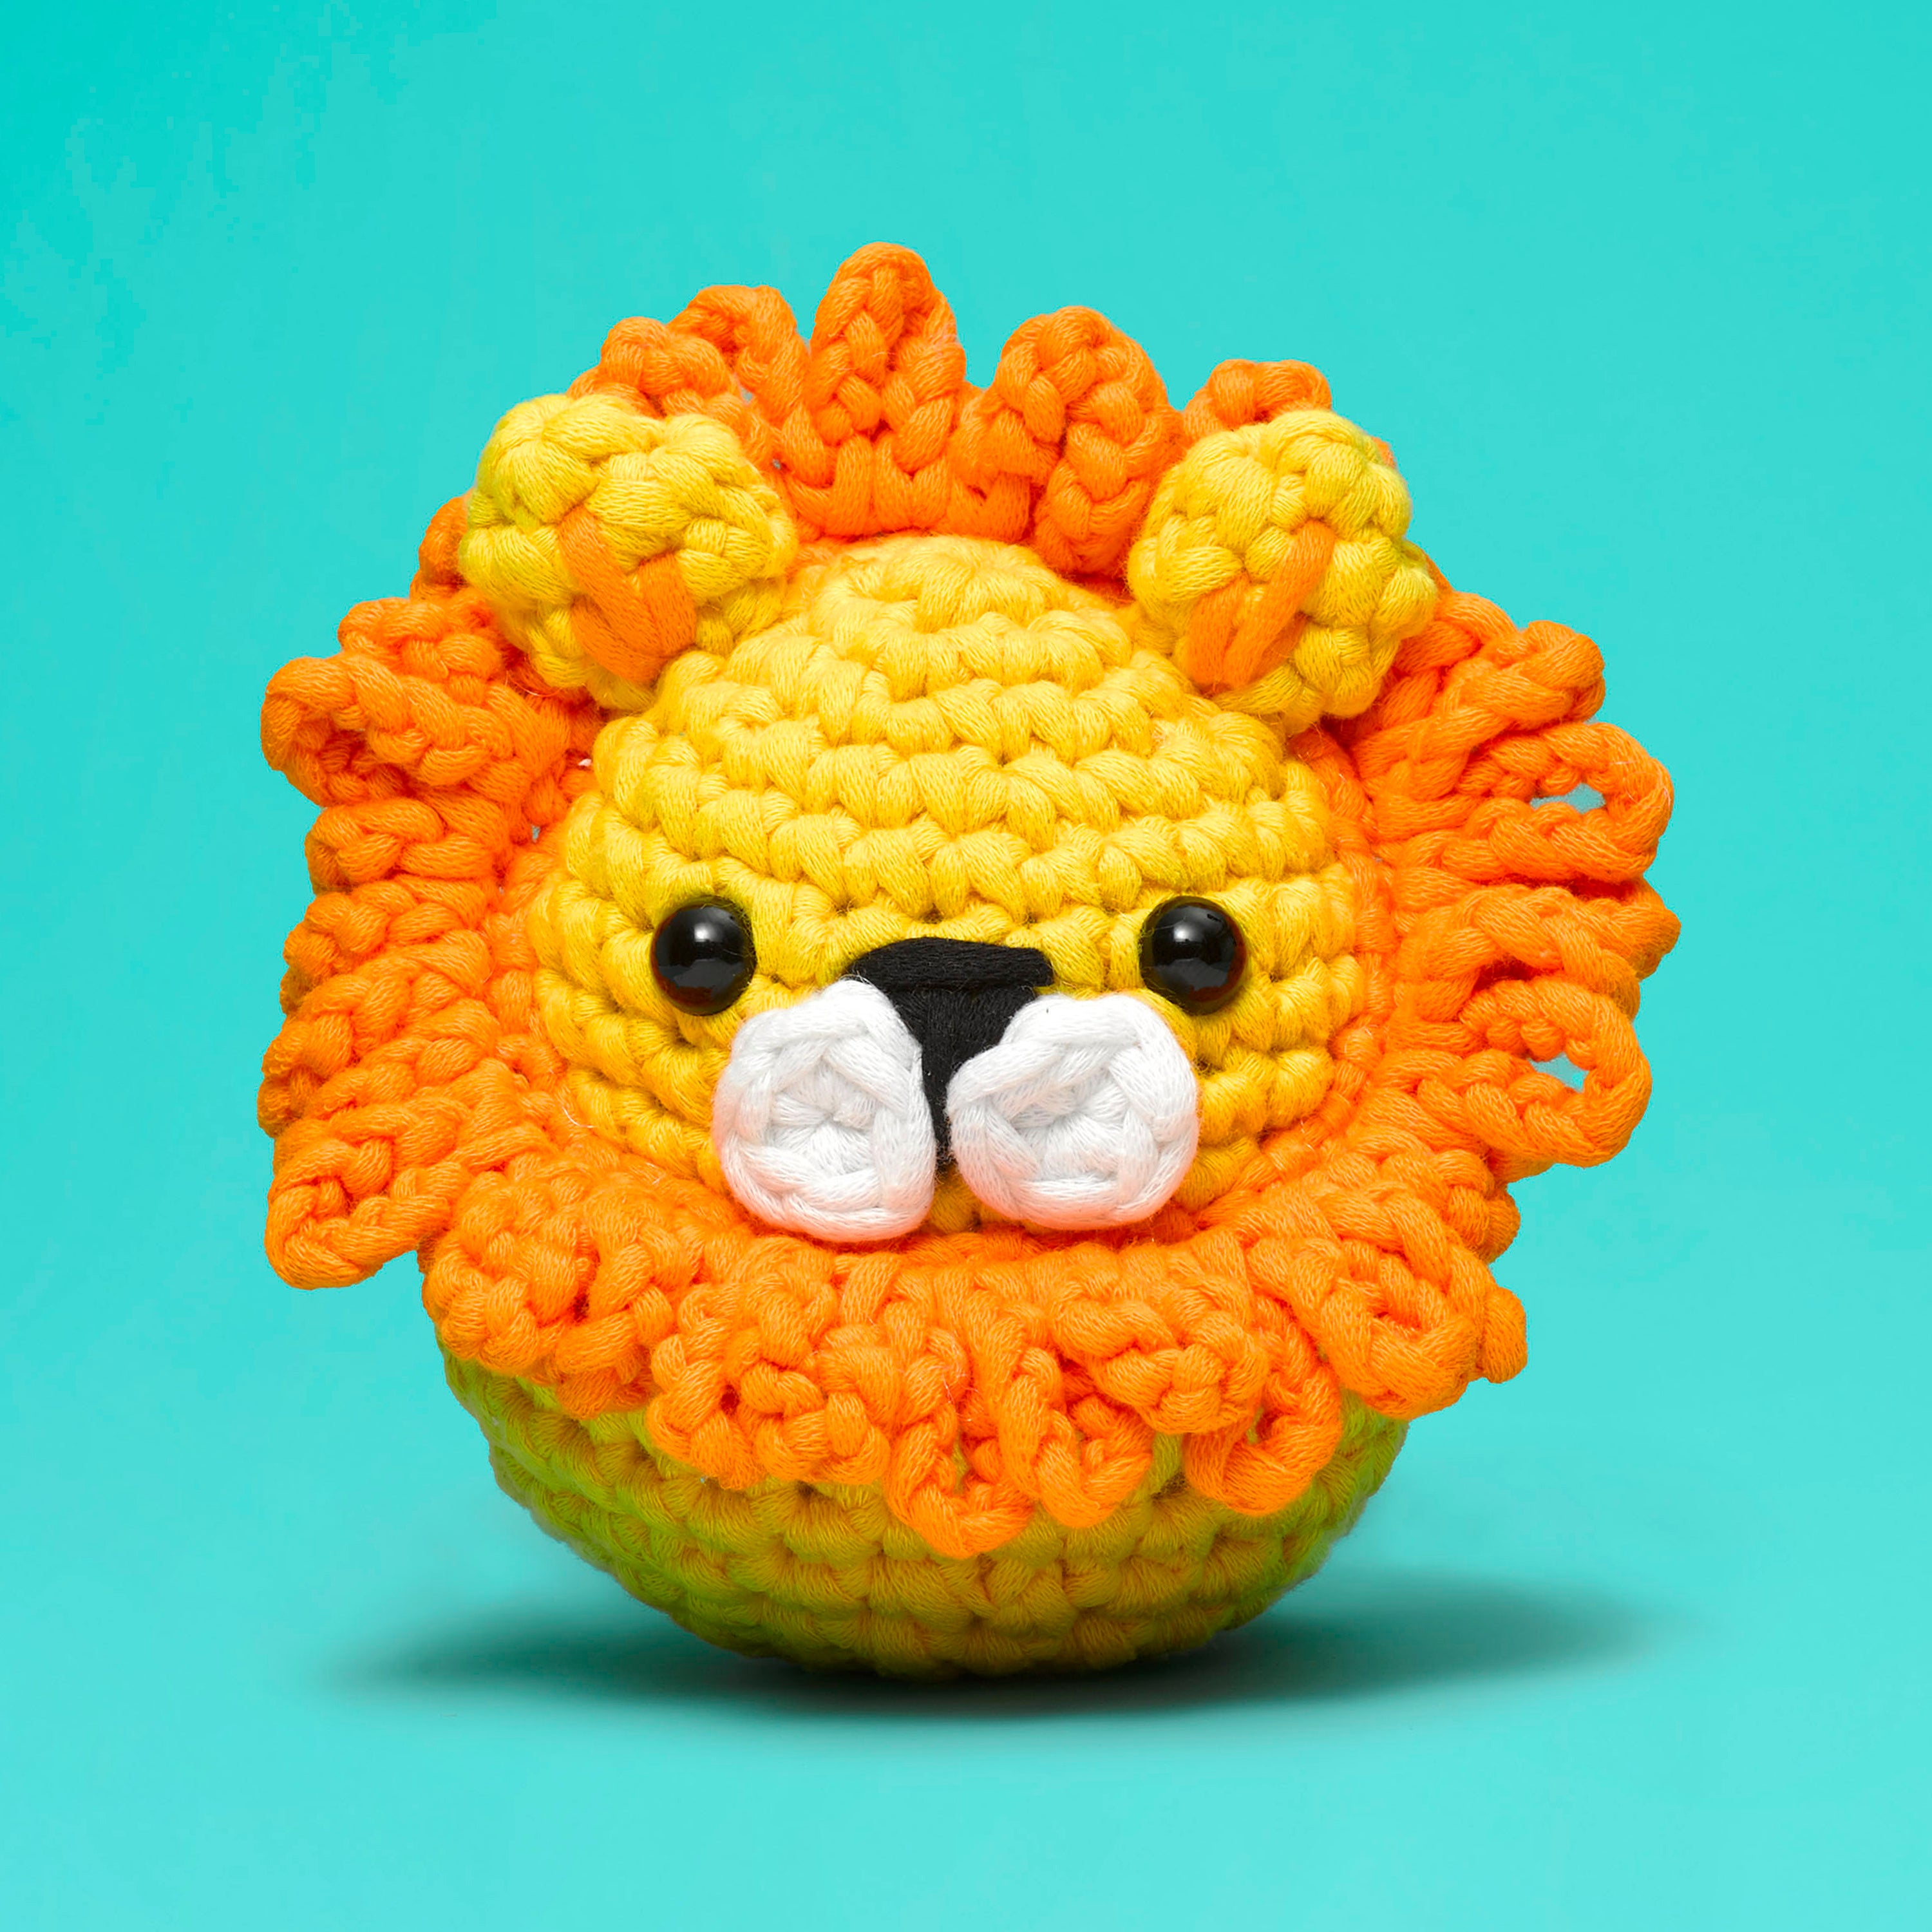 21 Irresistible Crochet Toy Patterns for Kids and Kids-at-Heart